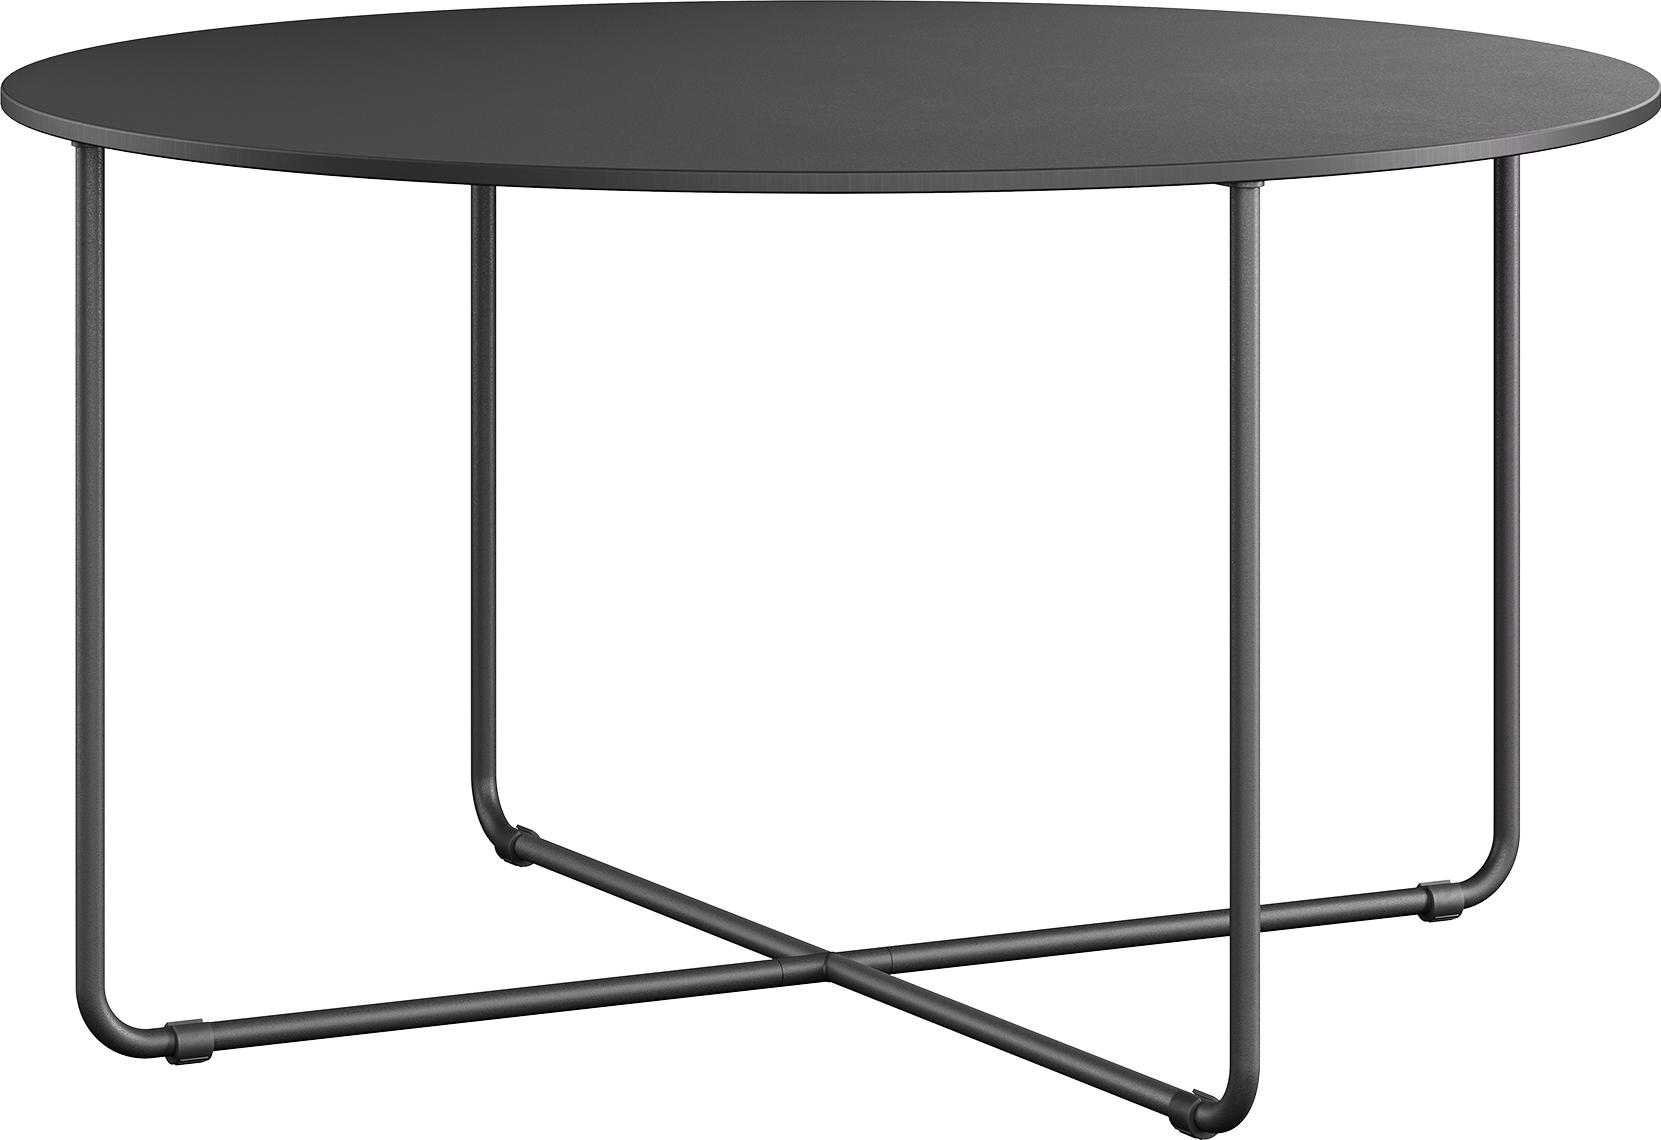 Mundi high coffee table with bent frame